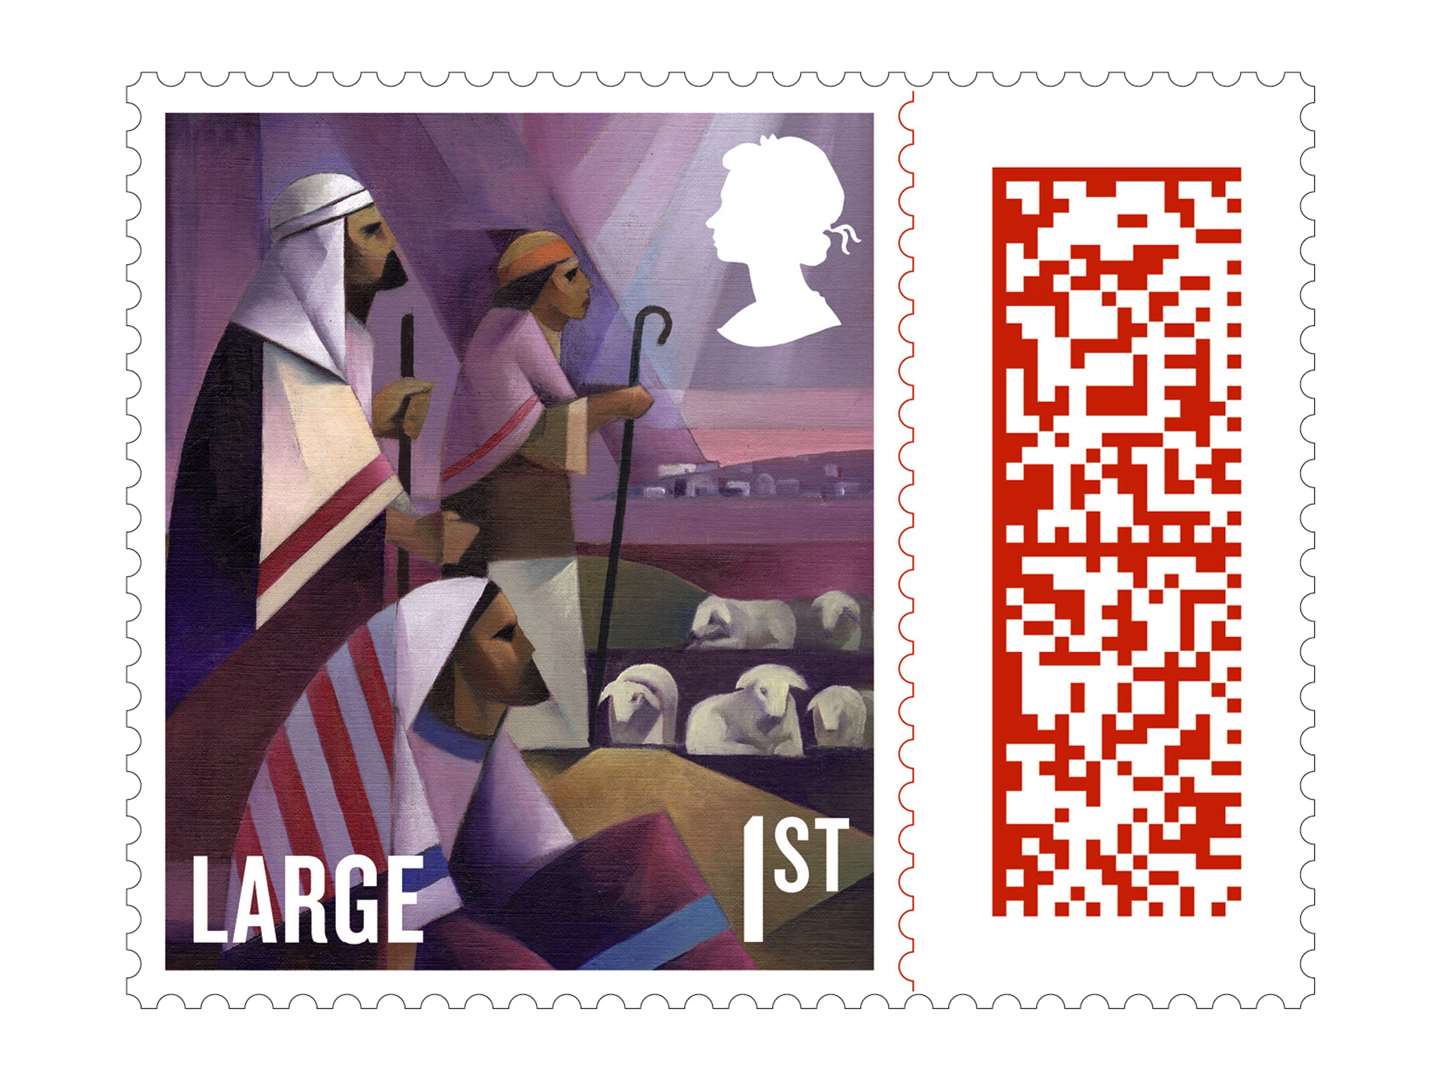 Some stamps this year will feature a barcode as Royal Mail trials new customer service features